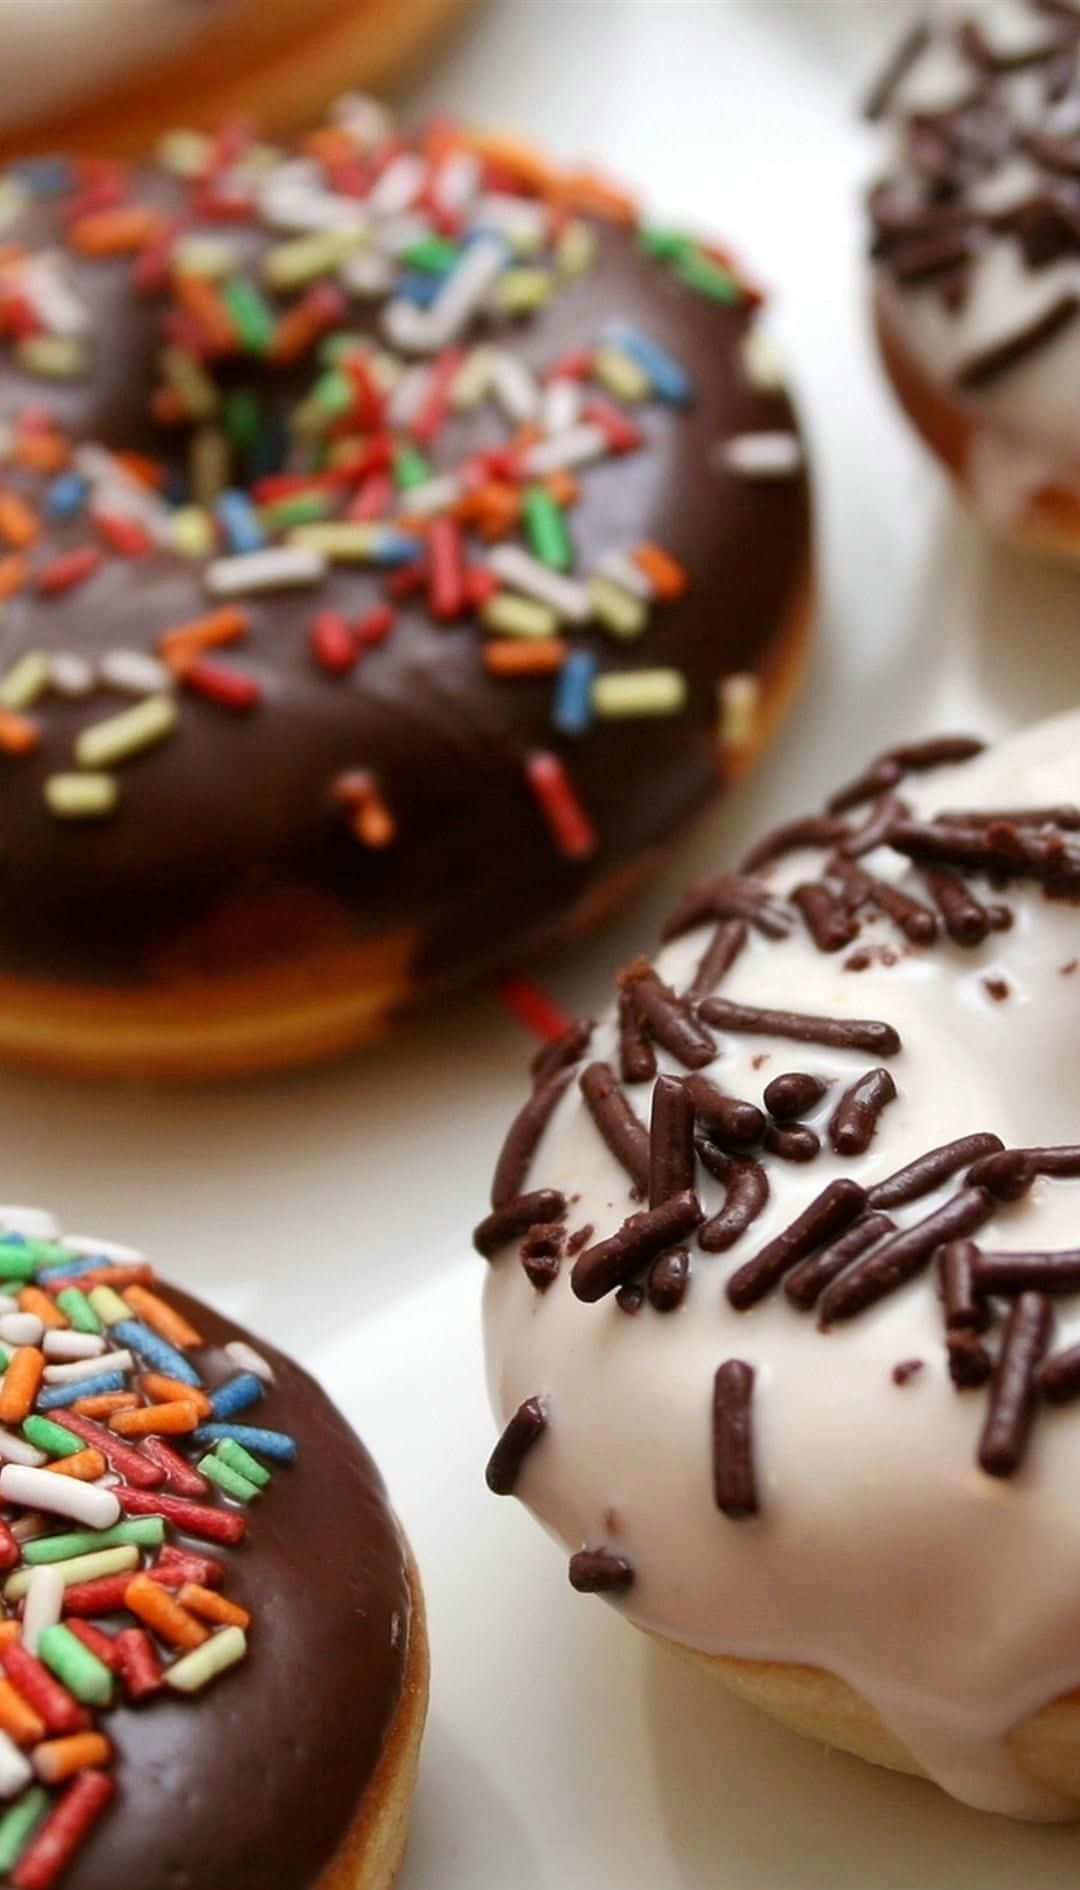 iPhone Food Chocolate Donuts With Sprinkles Wallpaper